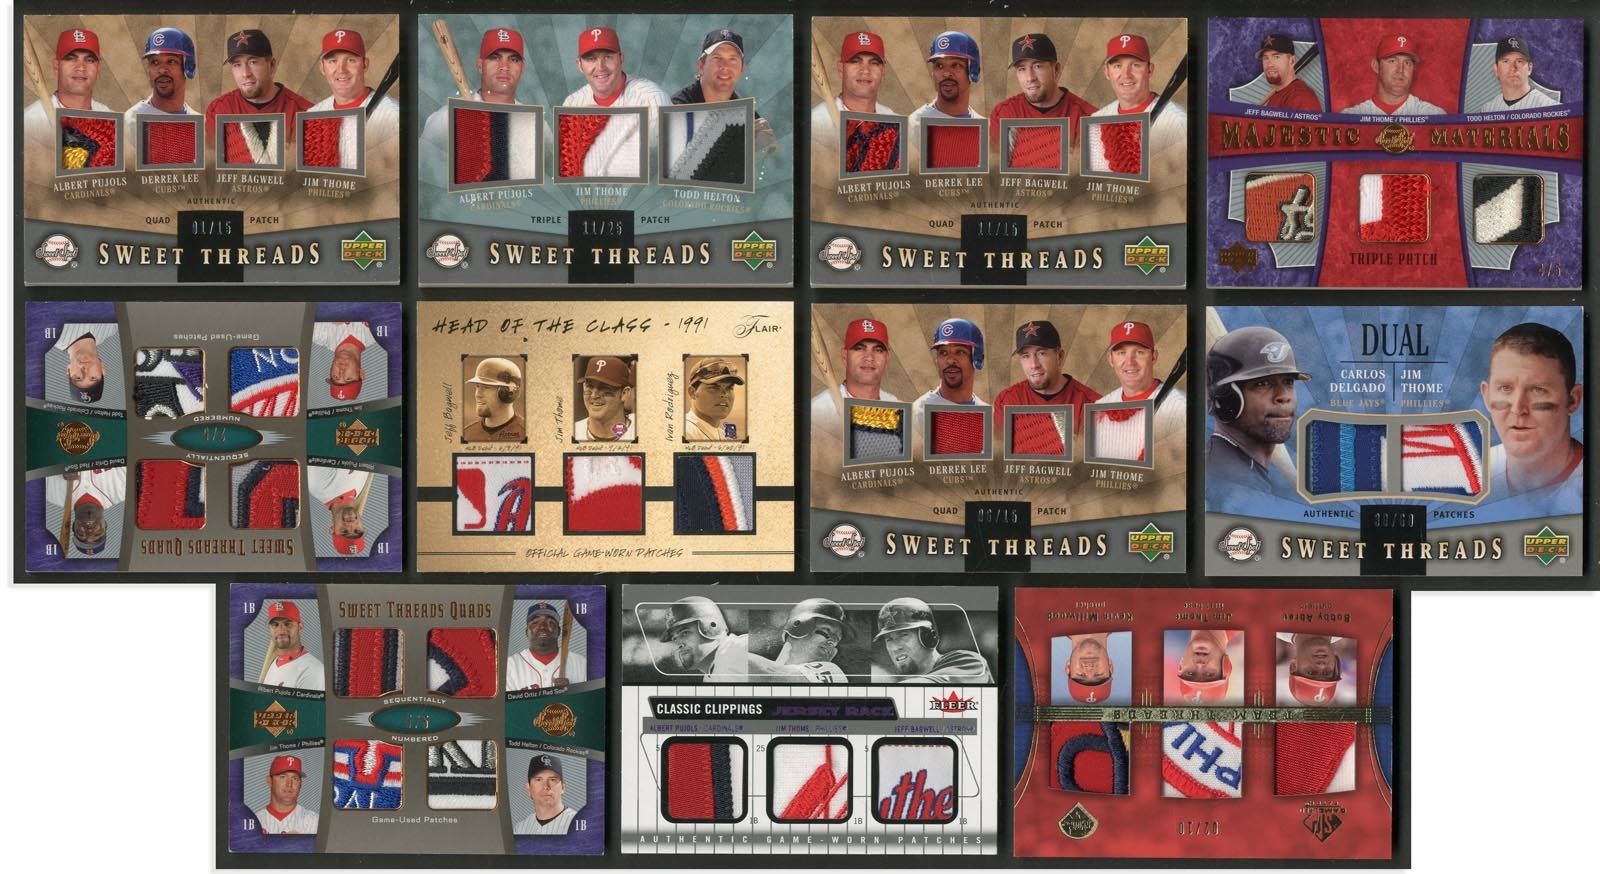 Jim Thome Master Collection - Modern Insert Multi-Patch Collection with Hall of Fame Legends (110+)